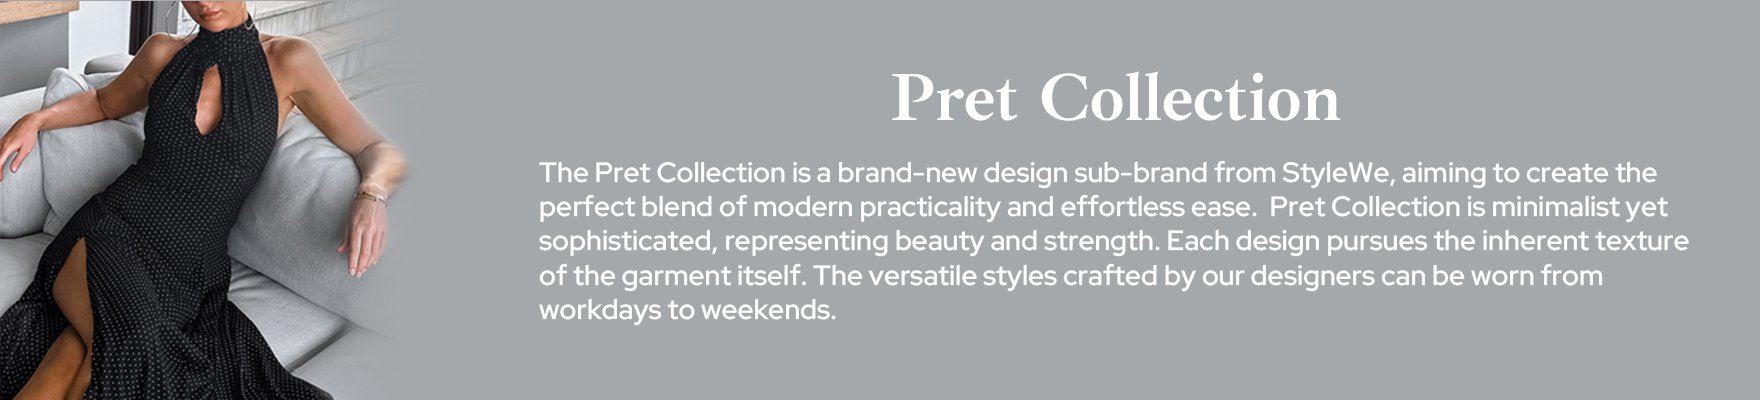 Pret Collection